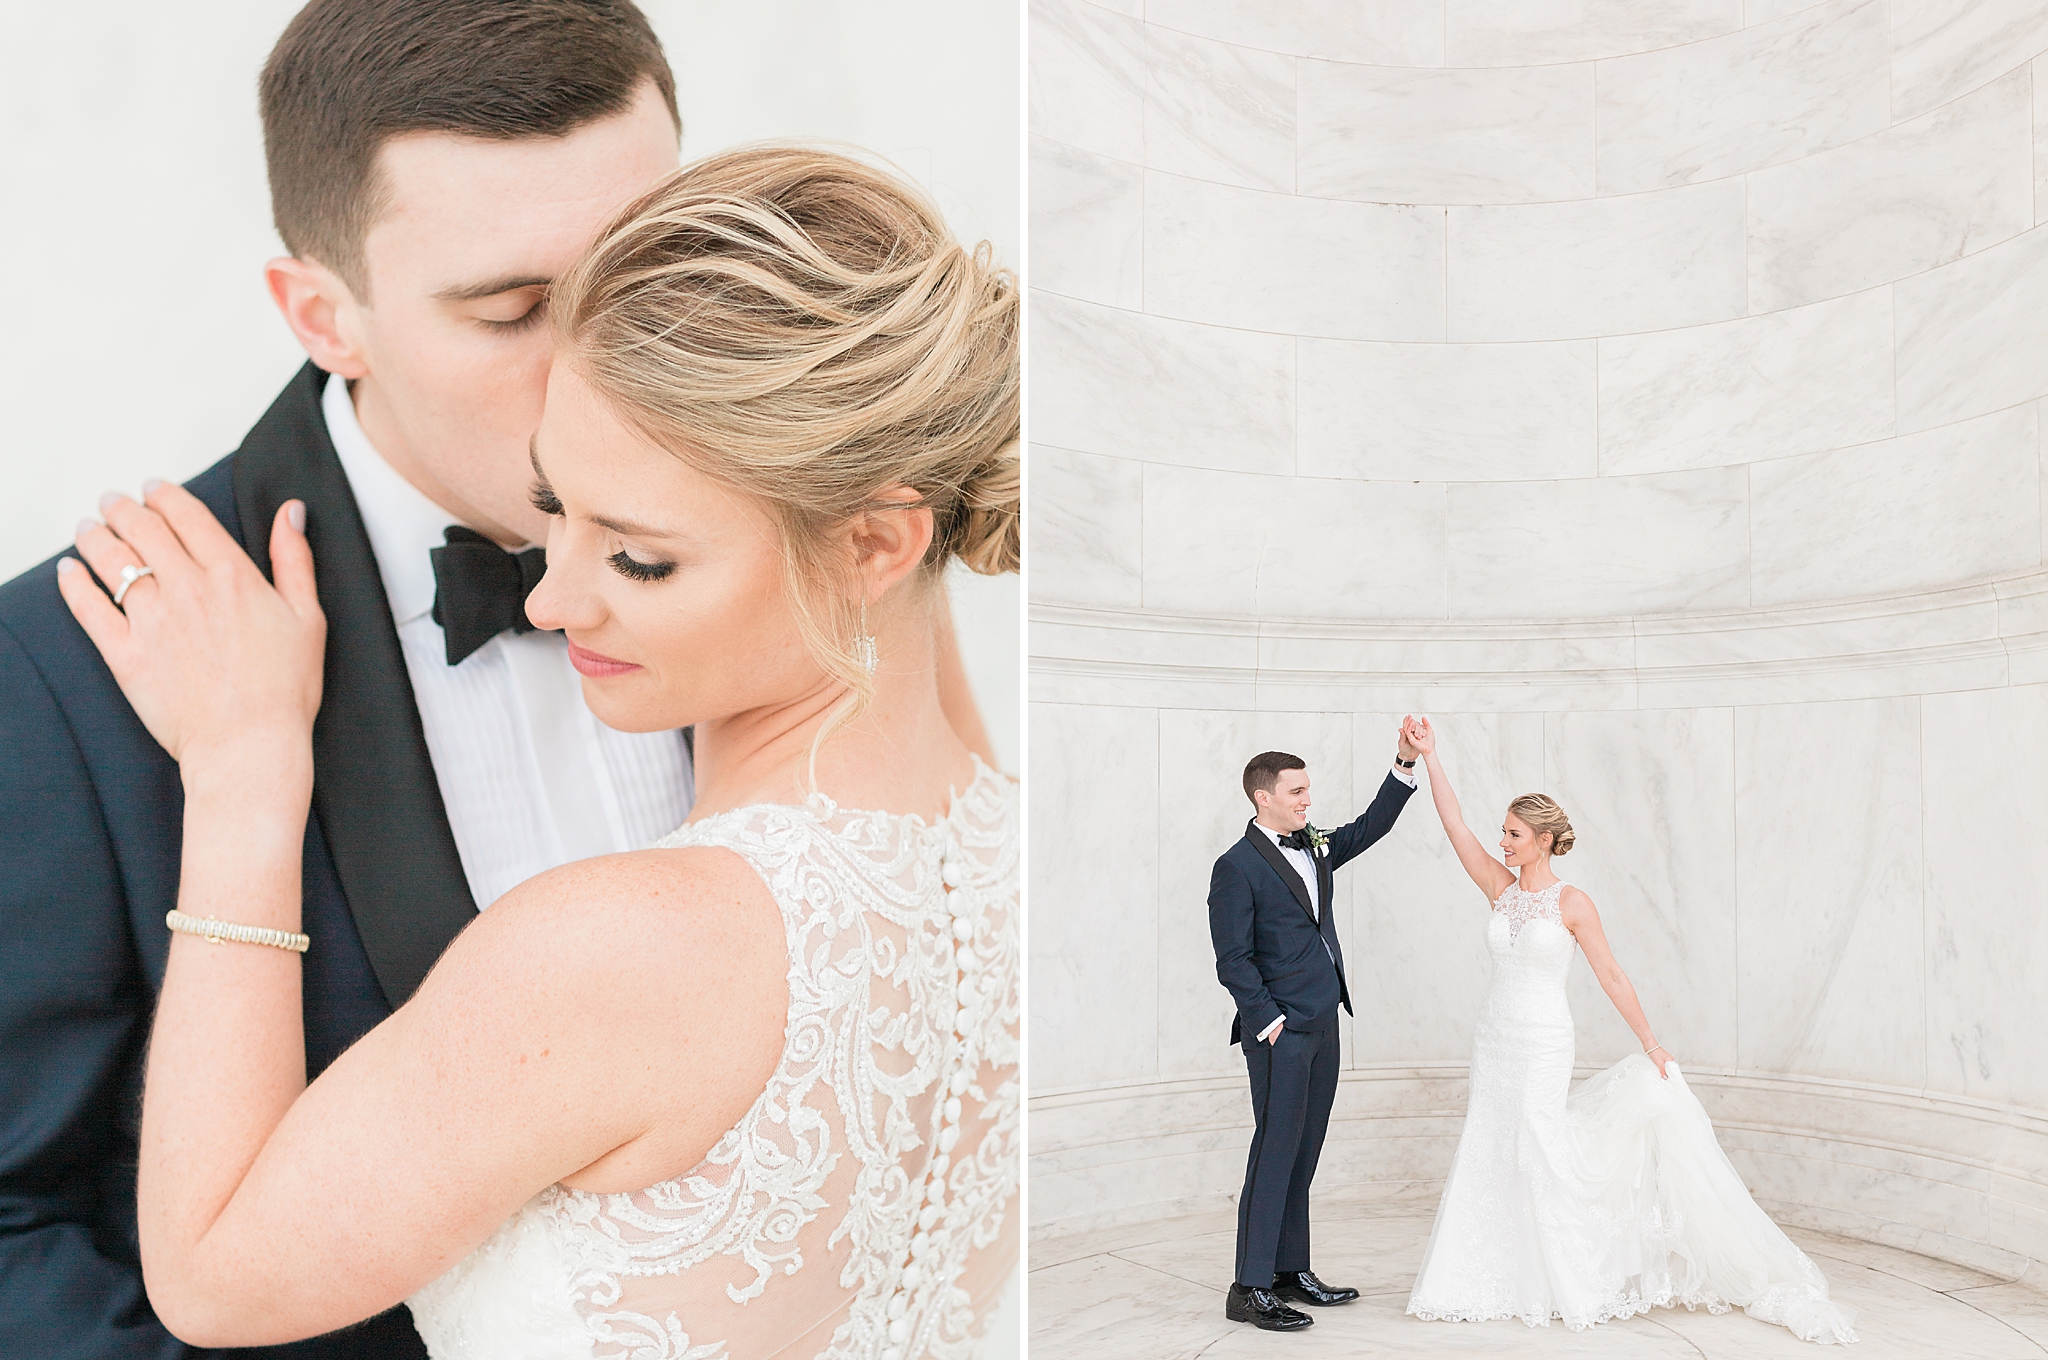 A classic Washington, DC wedding at the historic St. Matthews Cathedral with a reception at the Mayflower Hotel's Grand Ballroom.